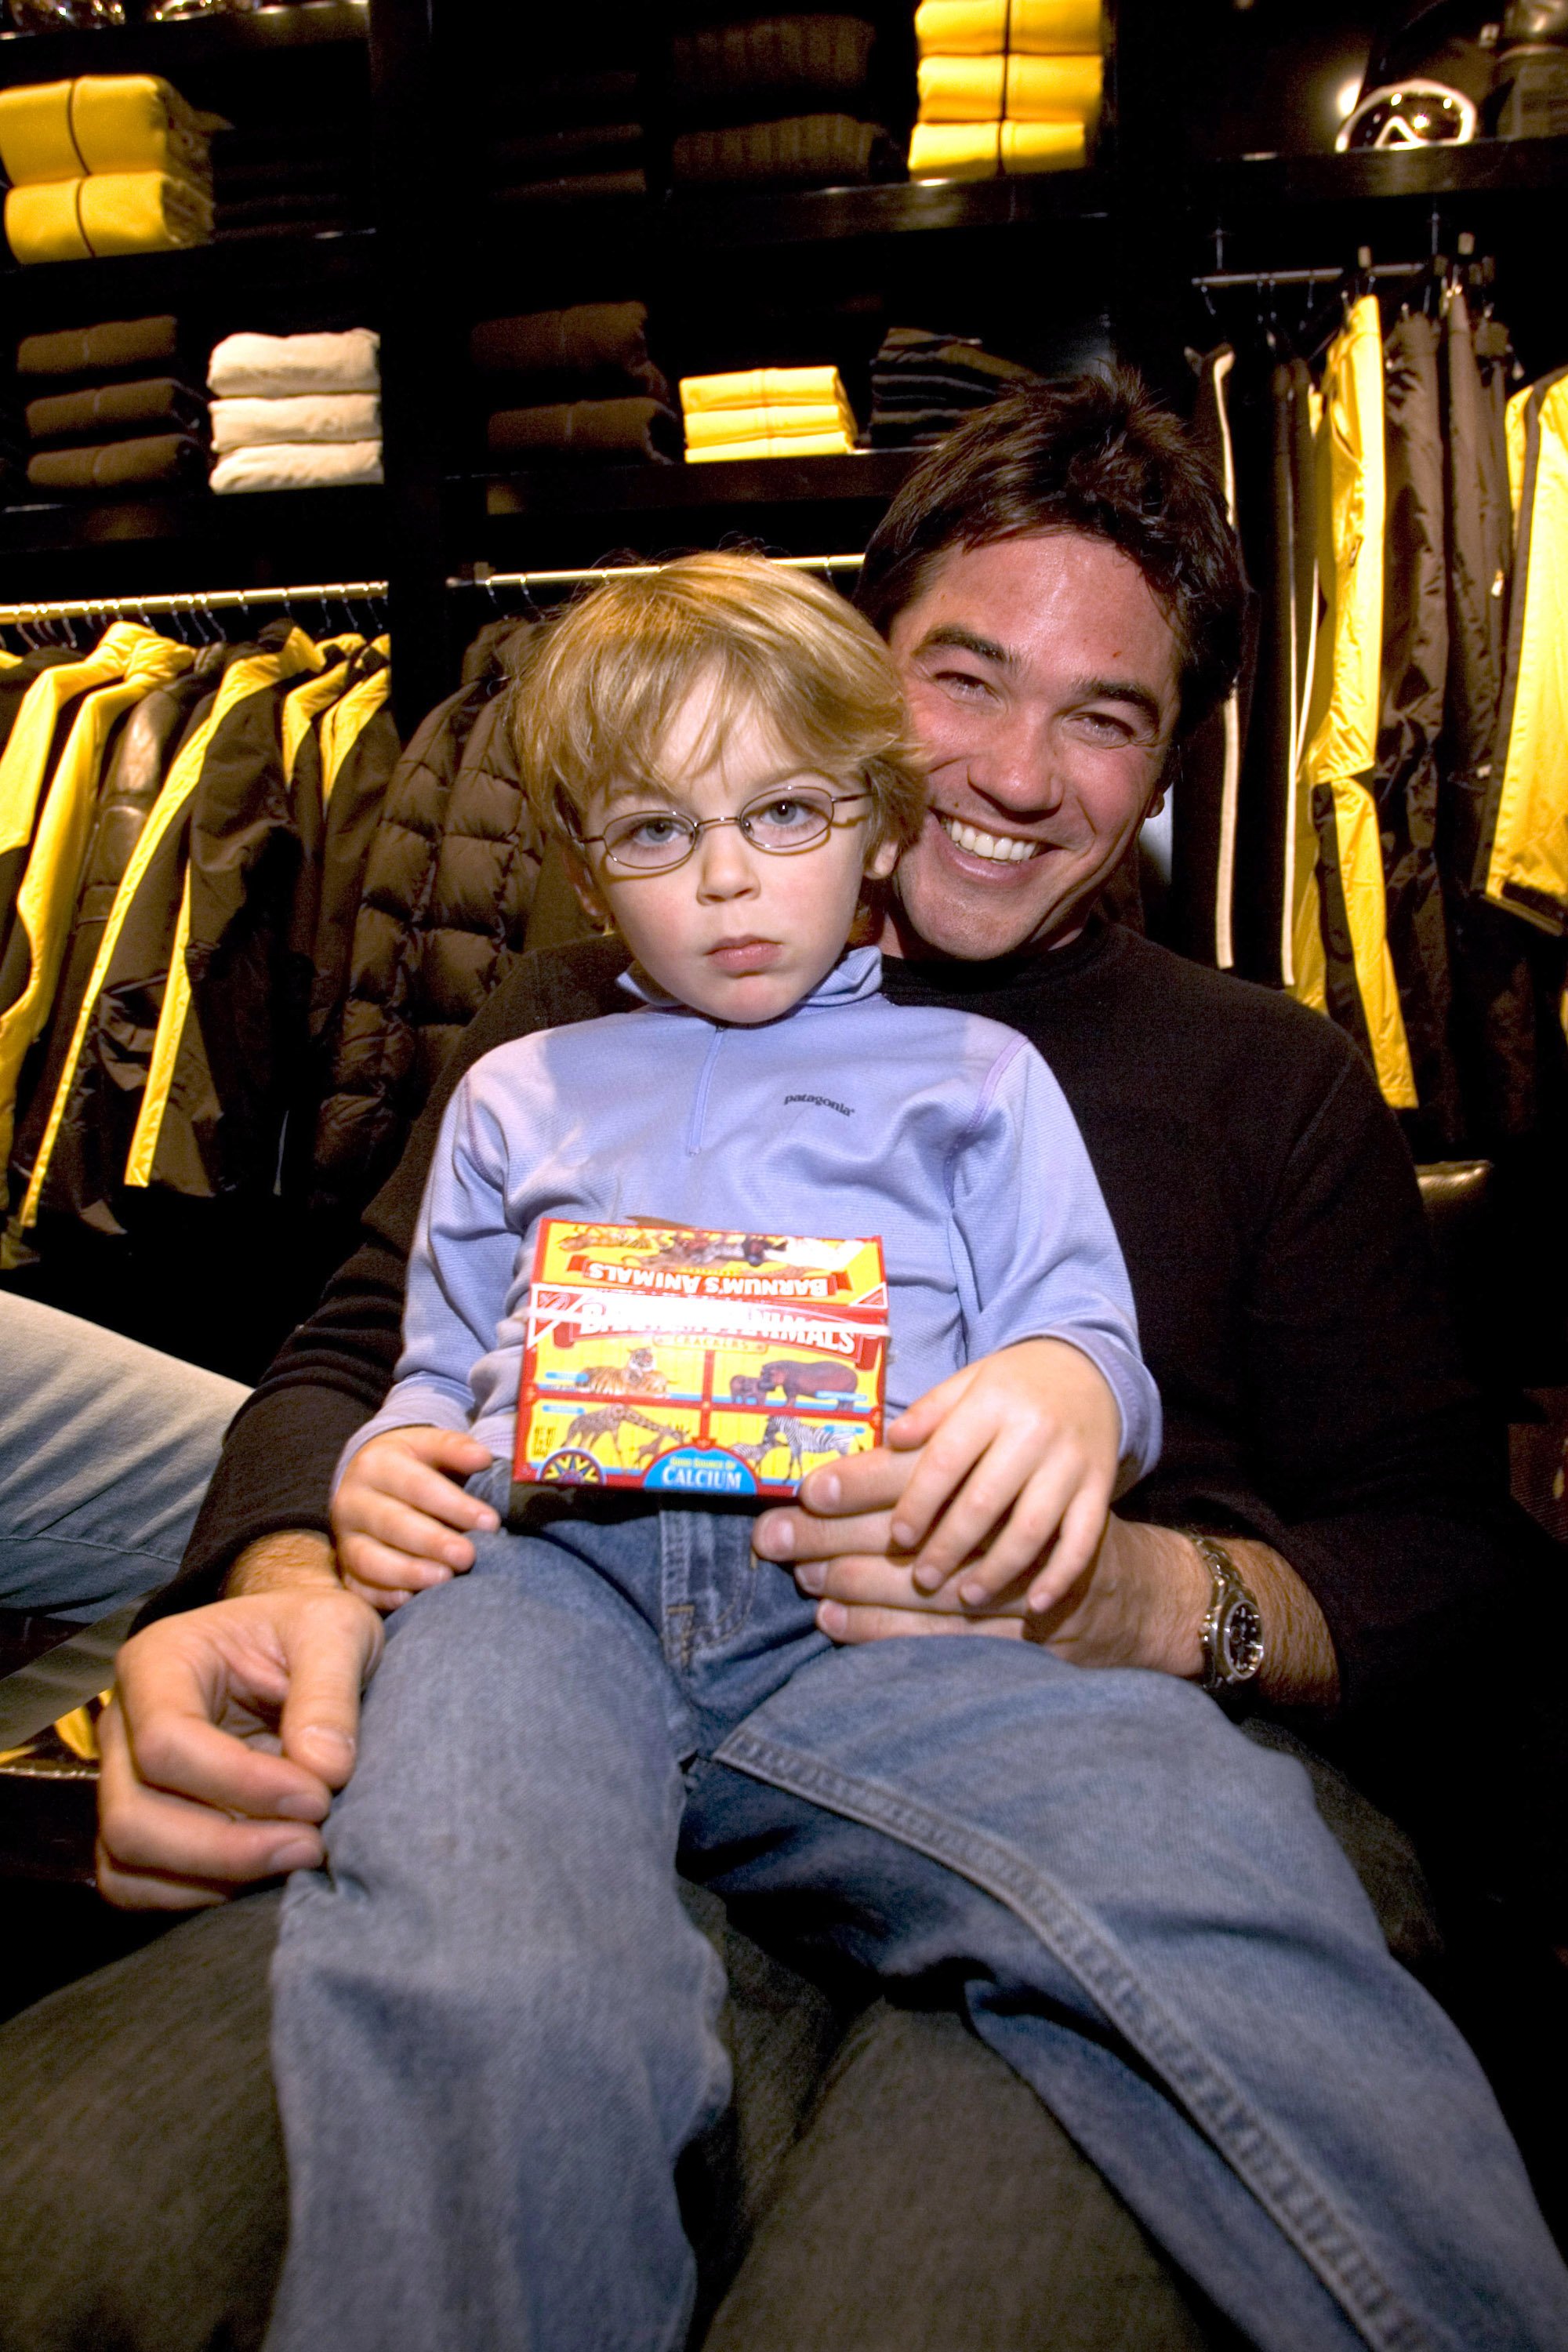 Christopher Cain and Dean Cain during Aspen Peak at the Opening of The New Ralph Lauren Aspen Store at The New Ralph Lauren store in Aspen in Aspen, Colorado, United States. | Source: Getty Images